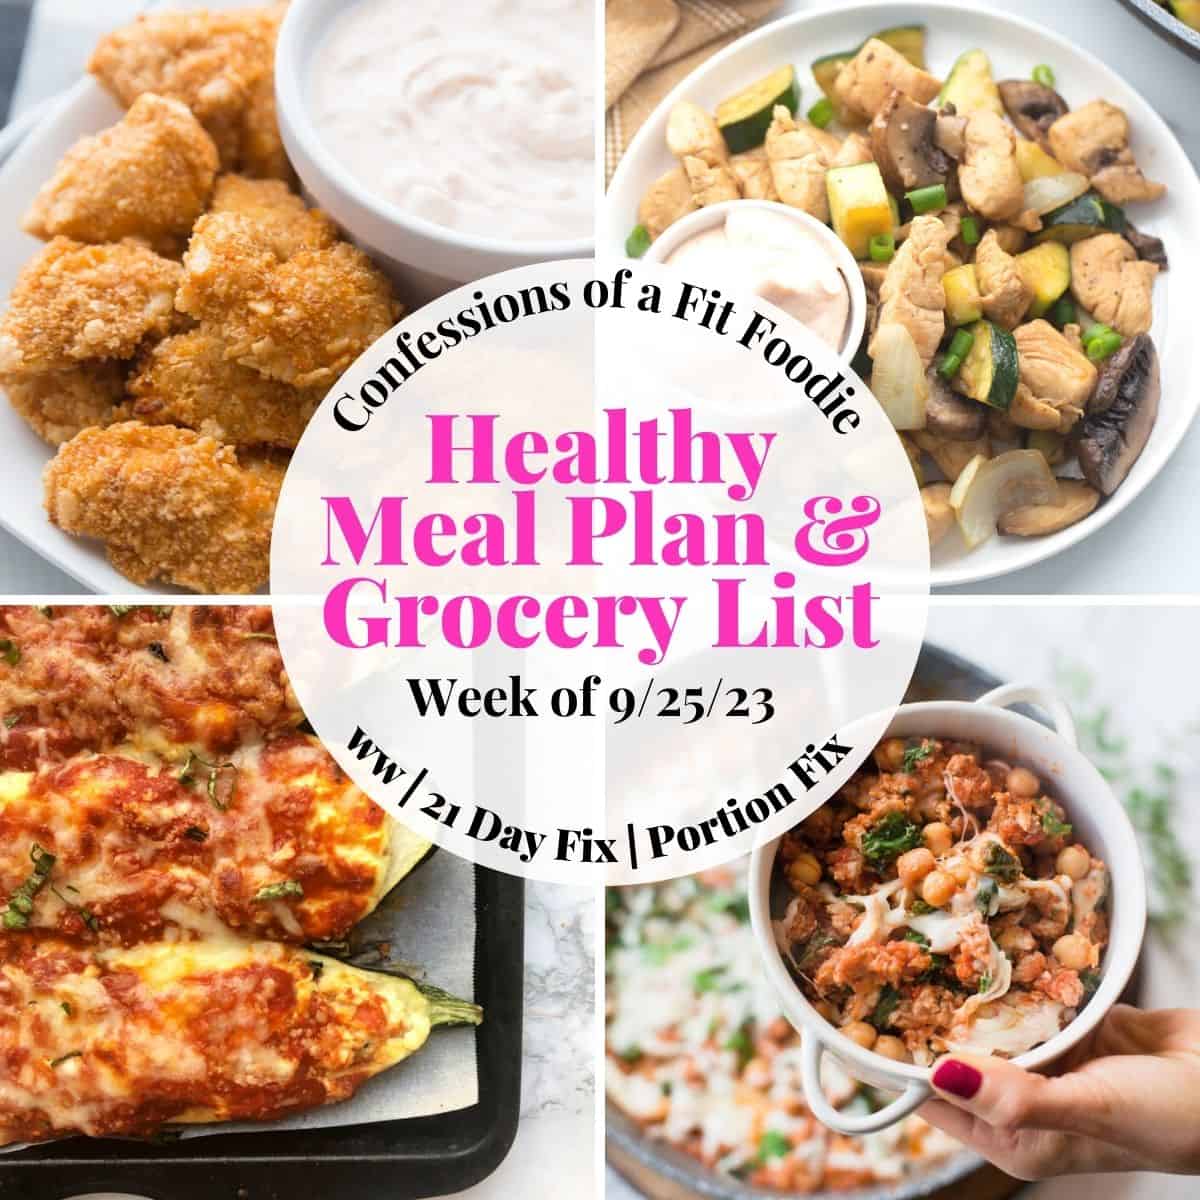 Food photo collage with pink and black text on a white circle. Text says, "Healthy Meal Plan & Grocery List 9/25/23"